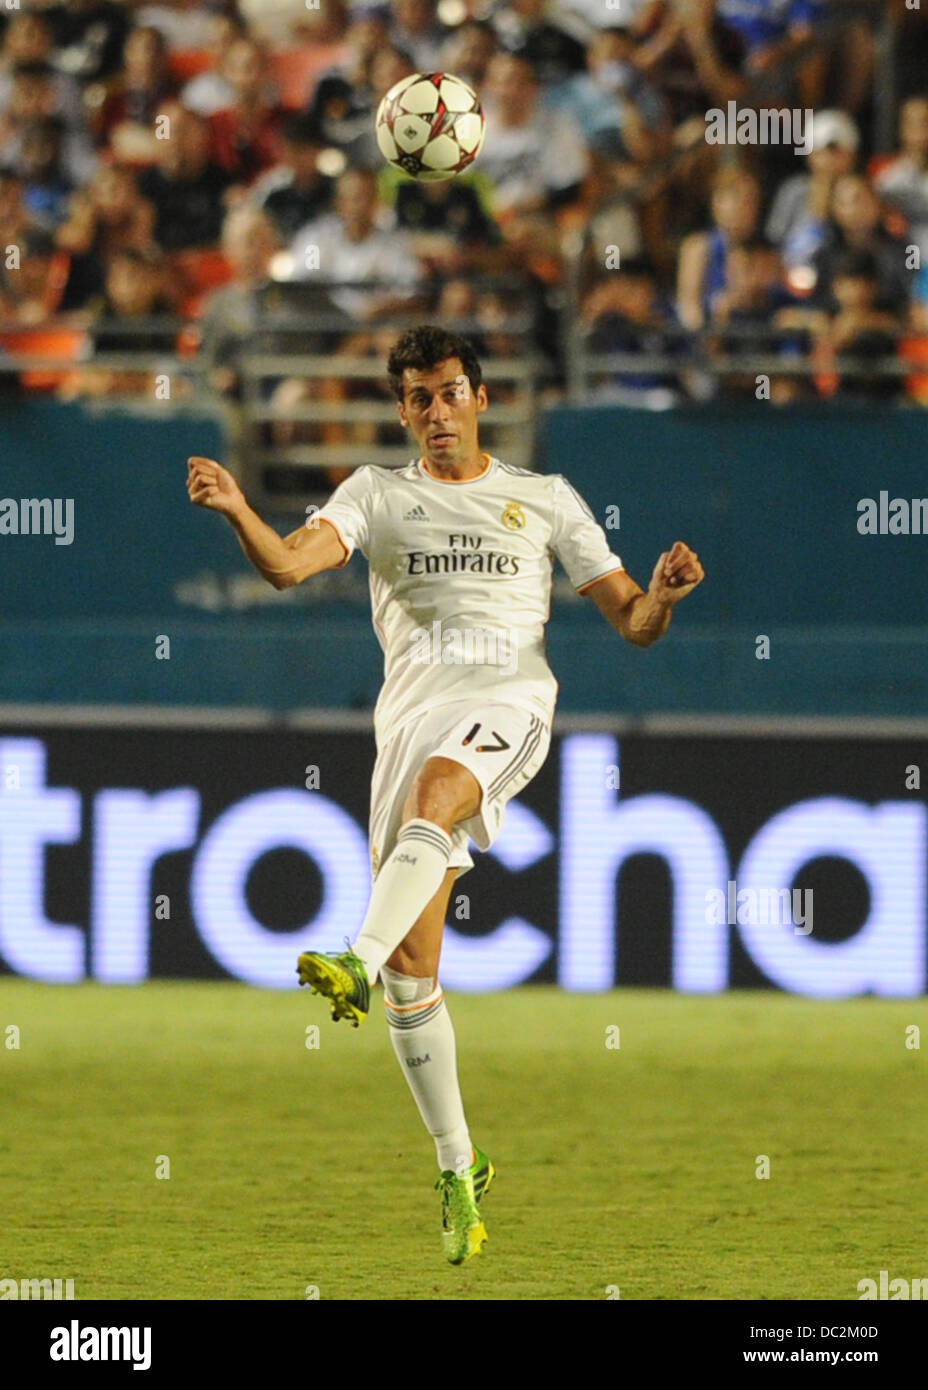 Miami, FL, USA. 08th Aug, 2013. Alvaro Arbeloa (17) during the second half of the the final of the Guinness International Champions Cup between Real madrid and Chelsea. The game was won by a score of 3-1 by Real Madrid with Ronaldo scoring a brace. Credit:  Action Plus Sports Images/Alamy Live News Stock Photo